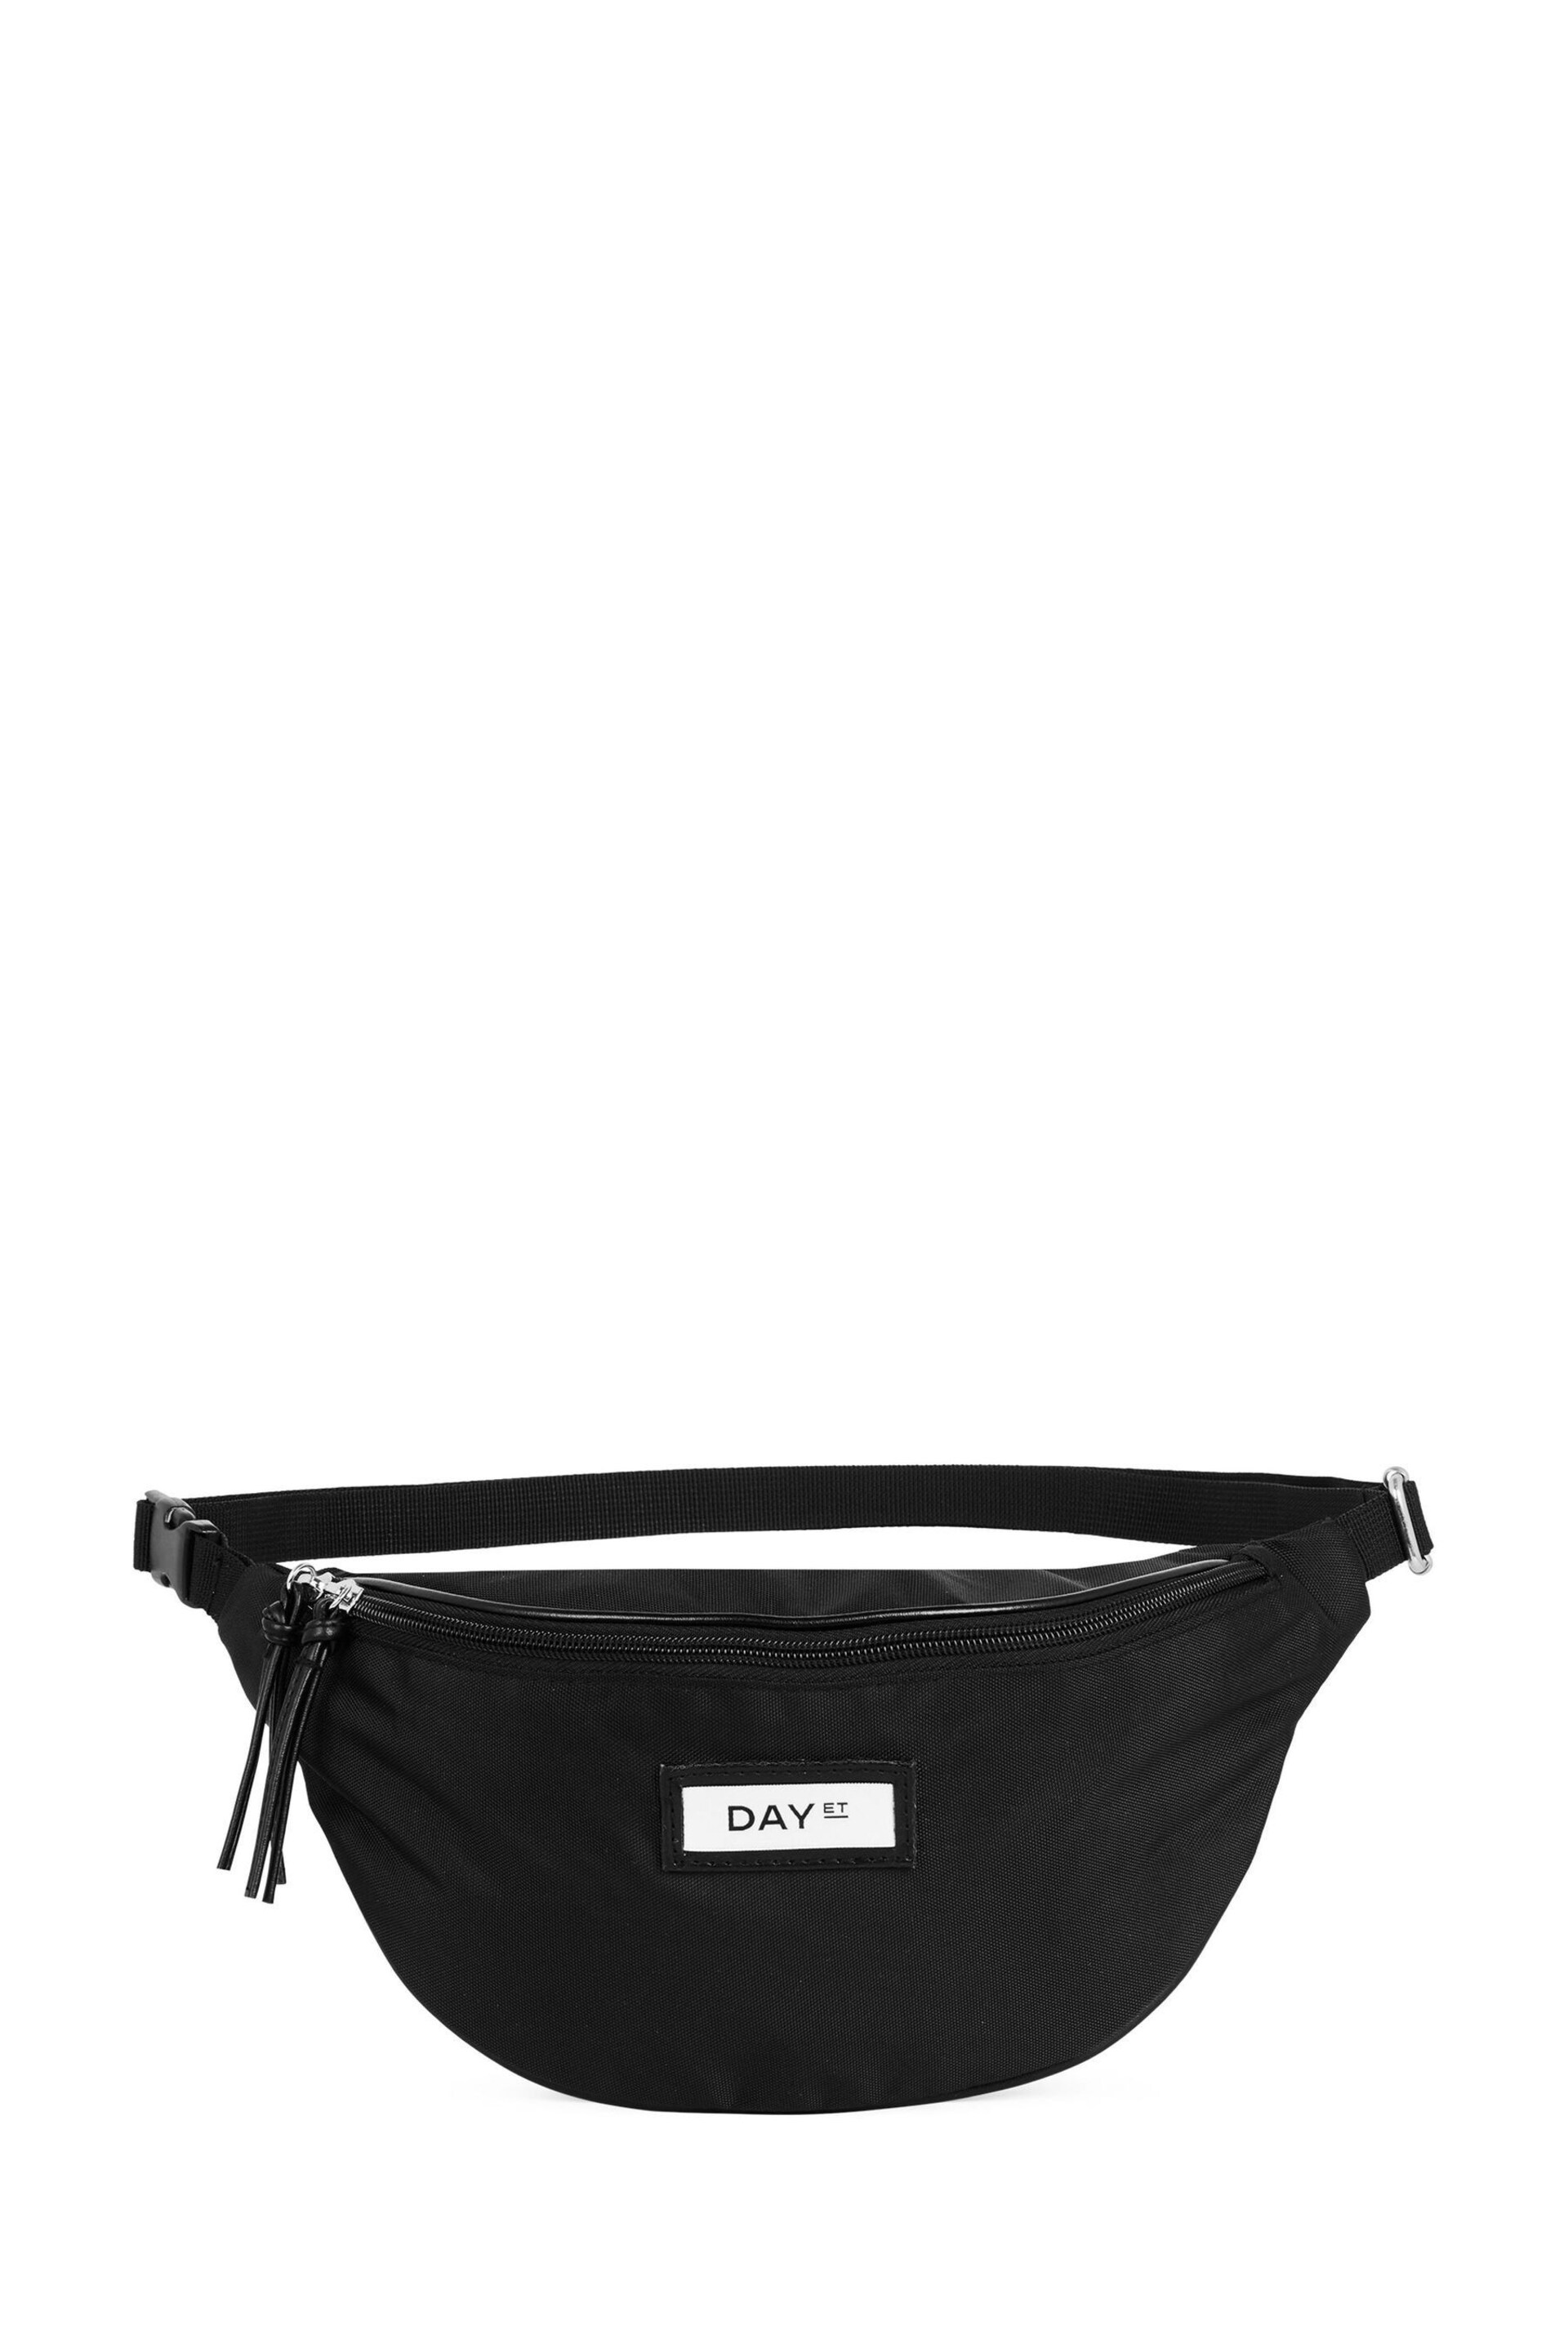 Day Et Black Gweneth RE-S Bum Bag - Image 2 of 3